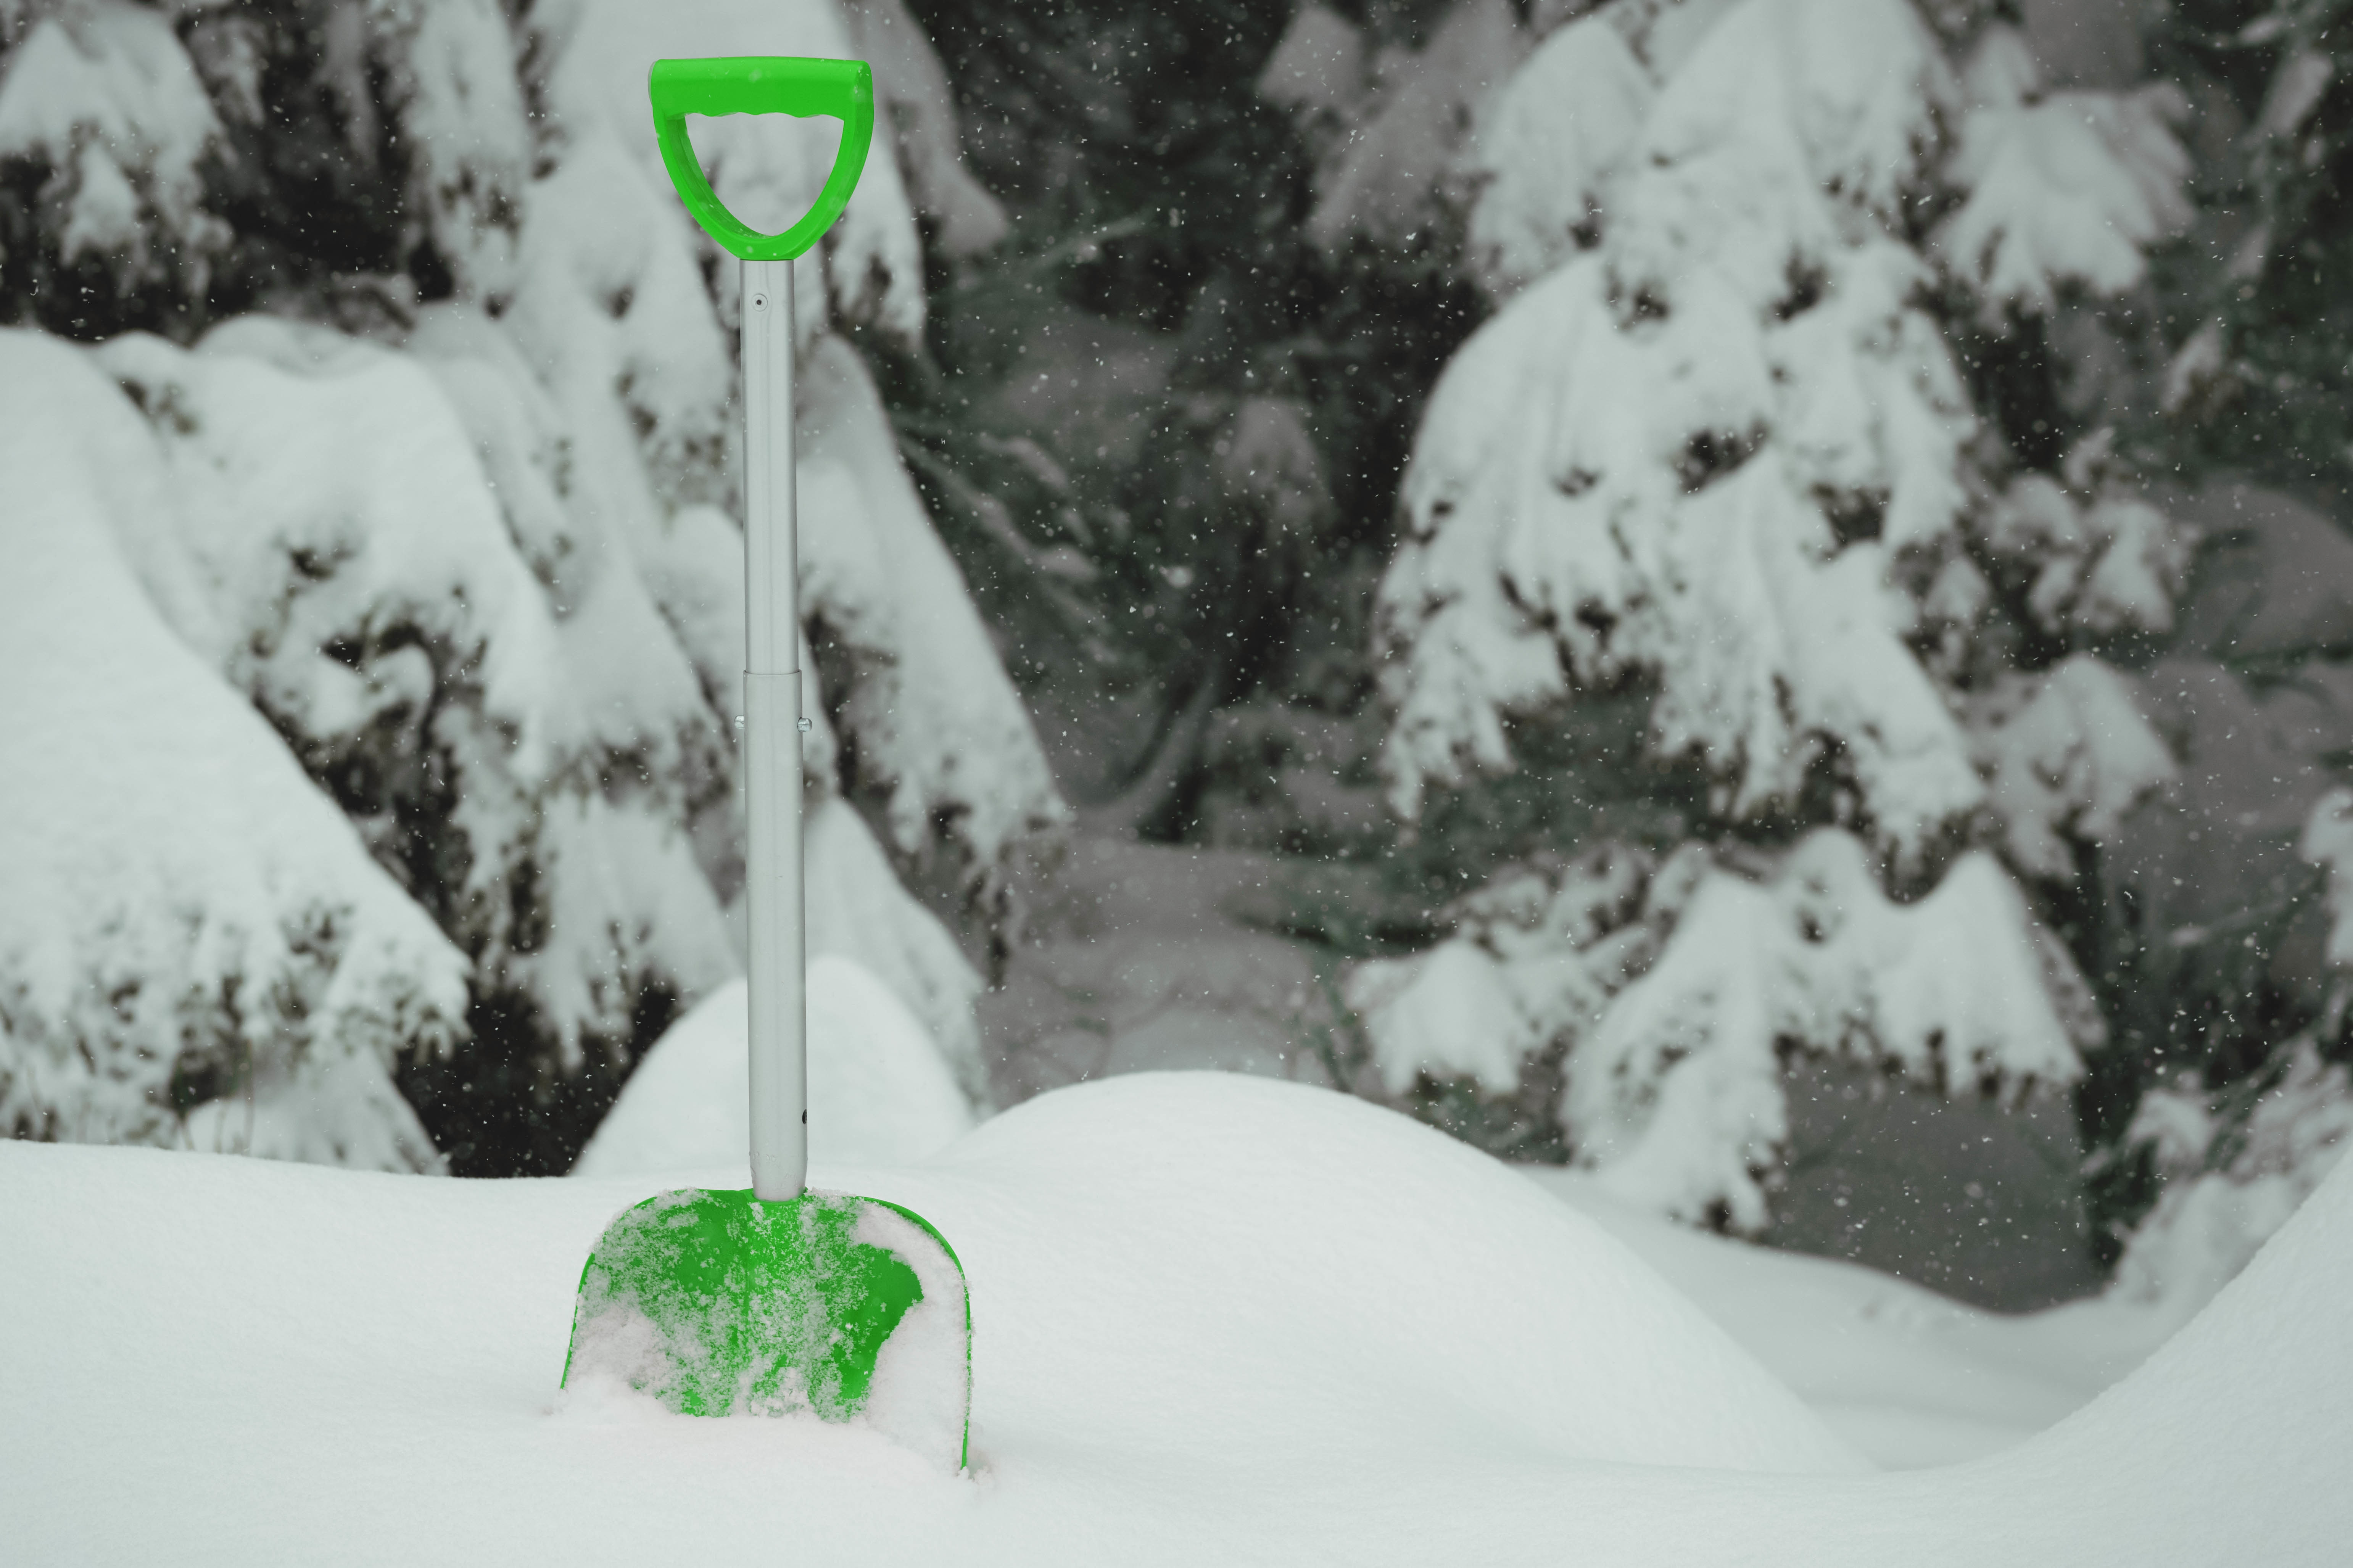 Green shovel in snow next to a line of trees